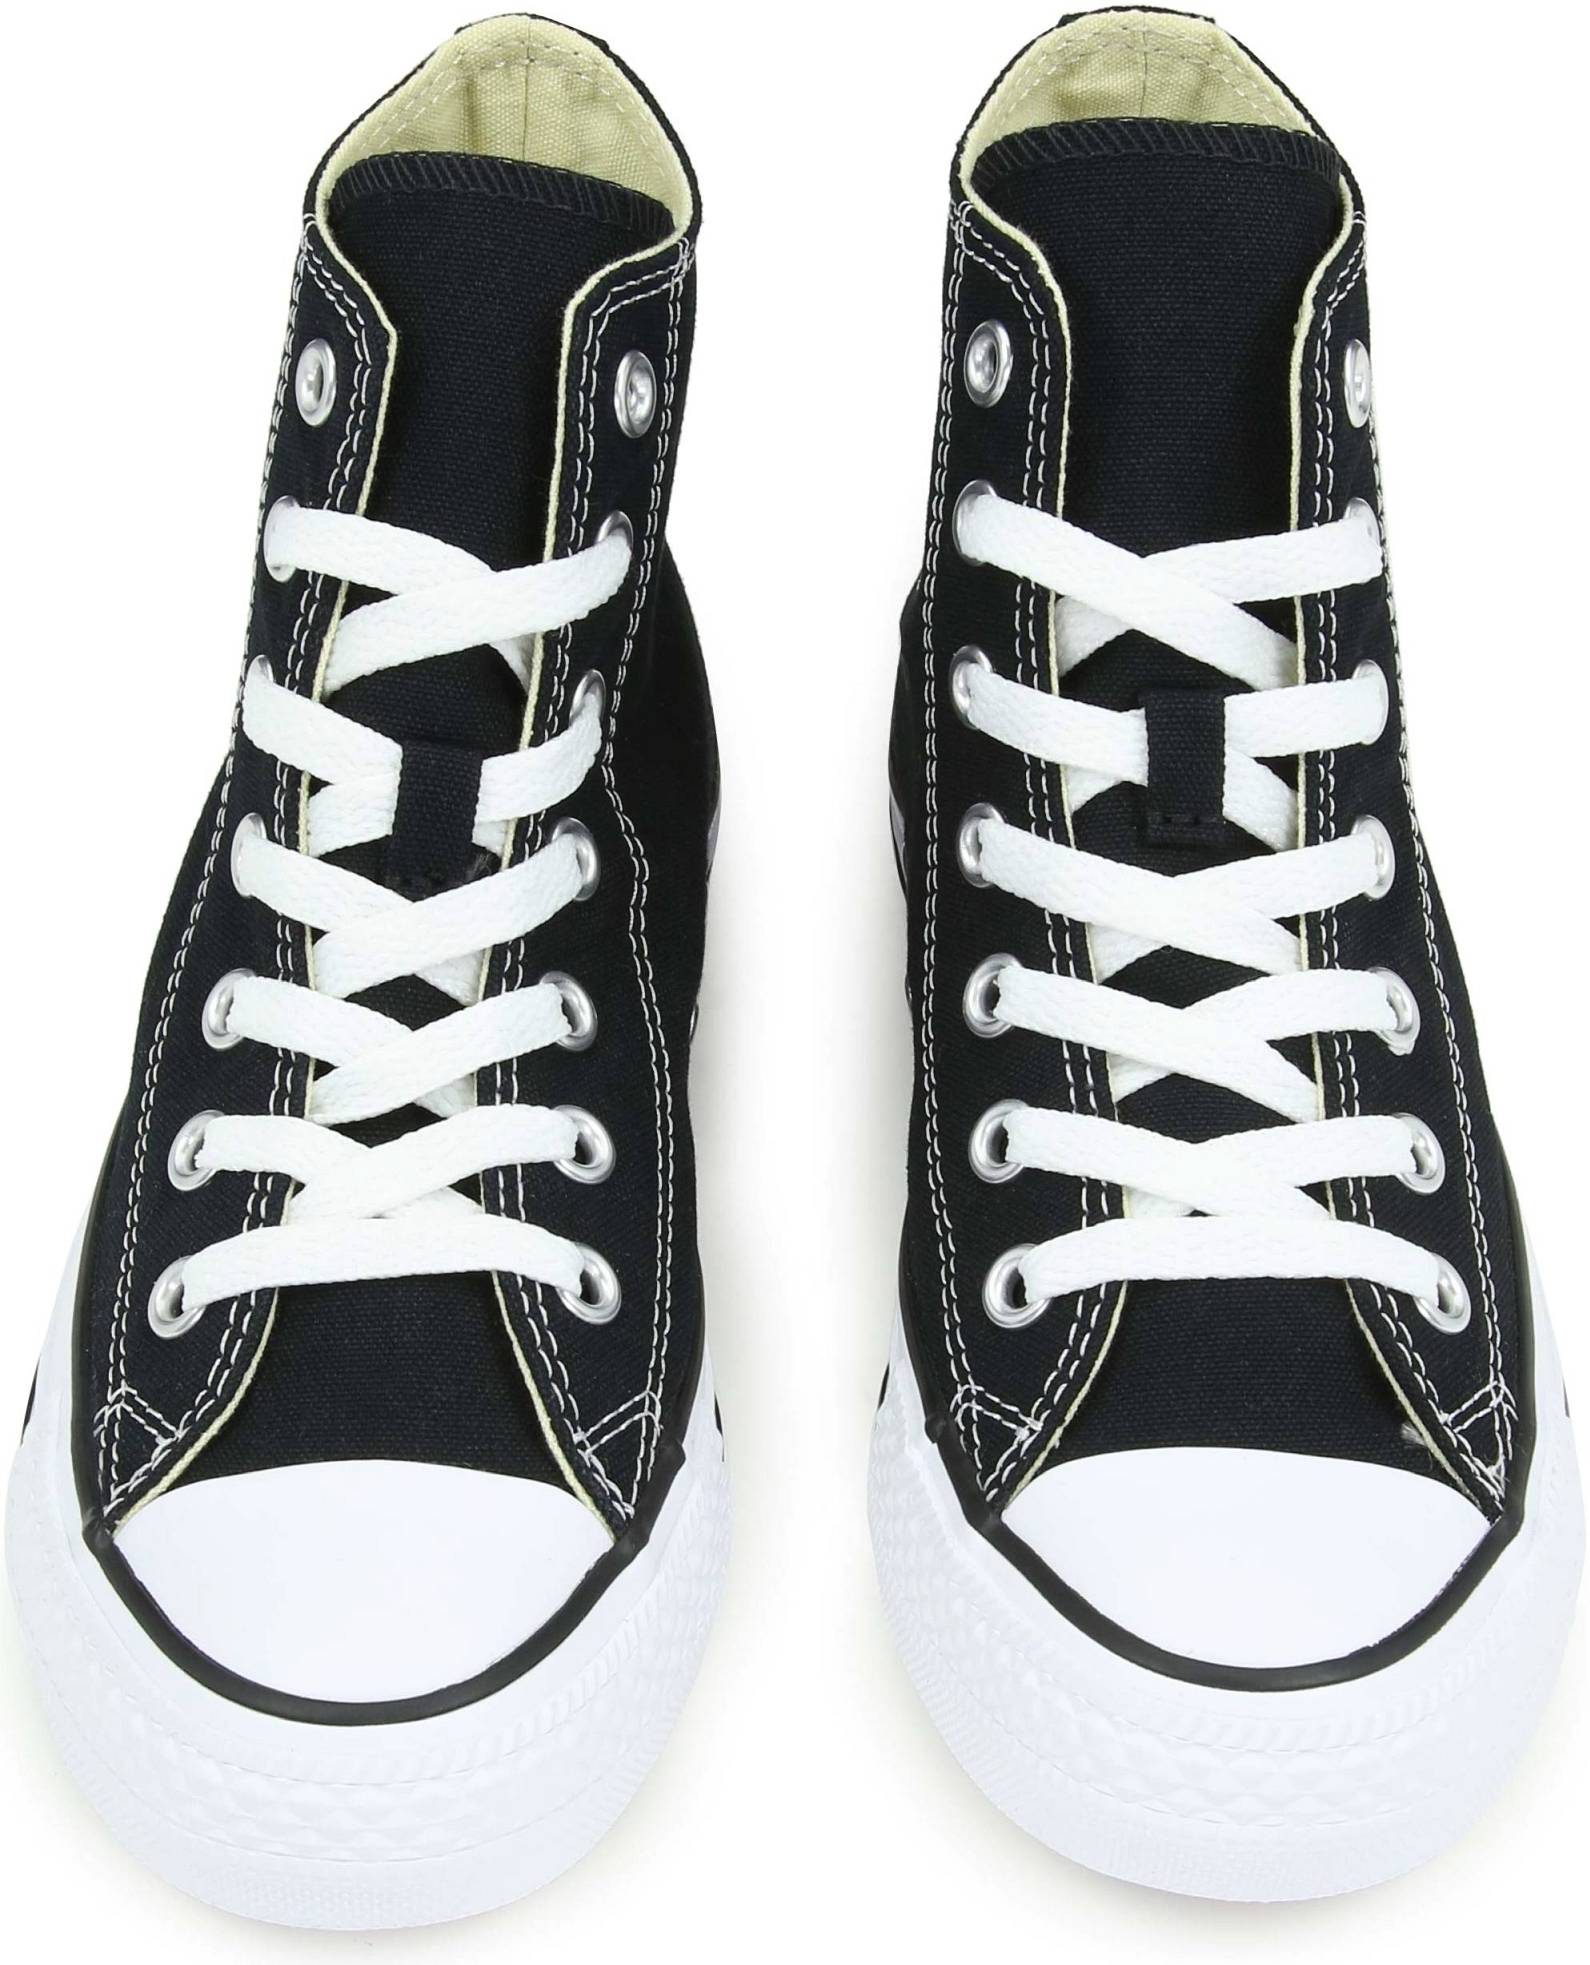 Converse Chuck Taylor All Star High Top – Shoes Reviews & Reasons To Buy